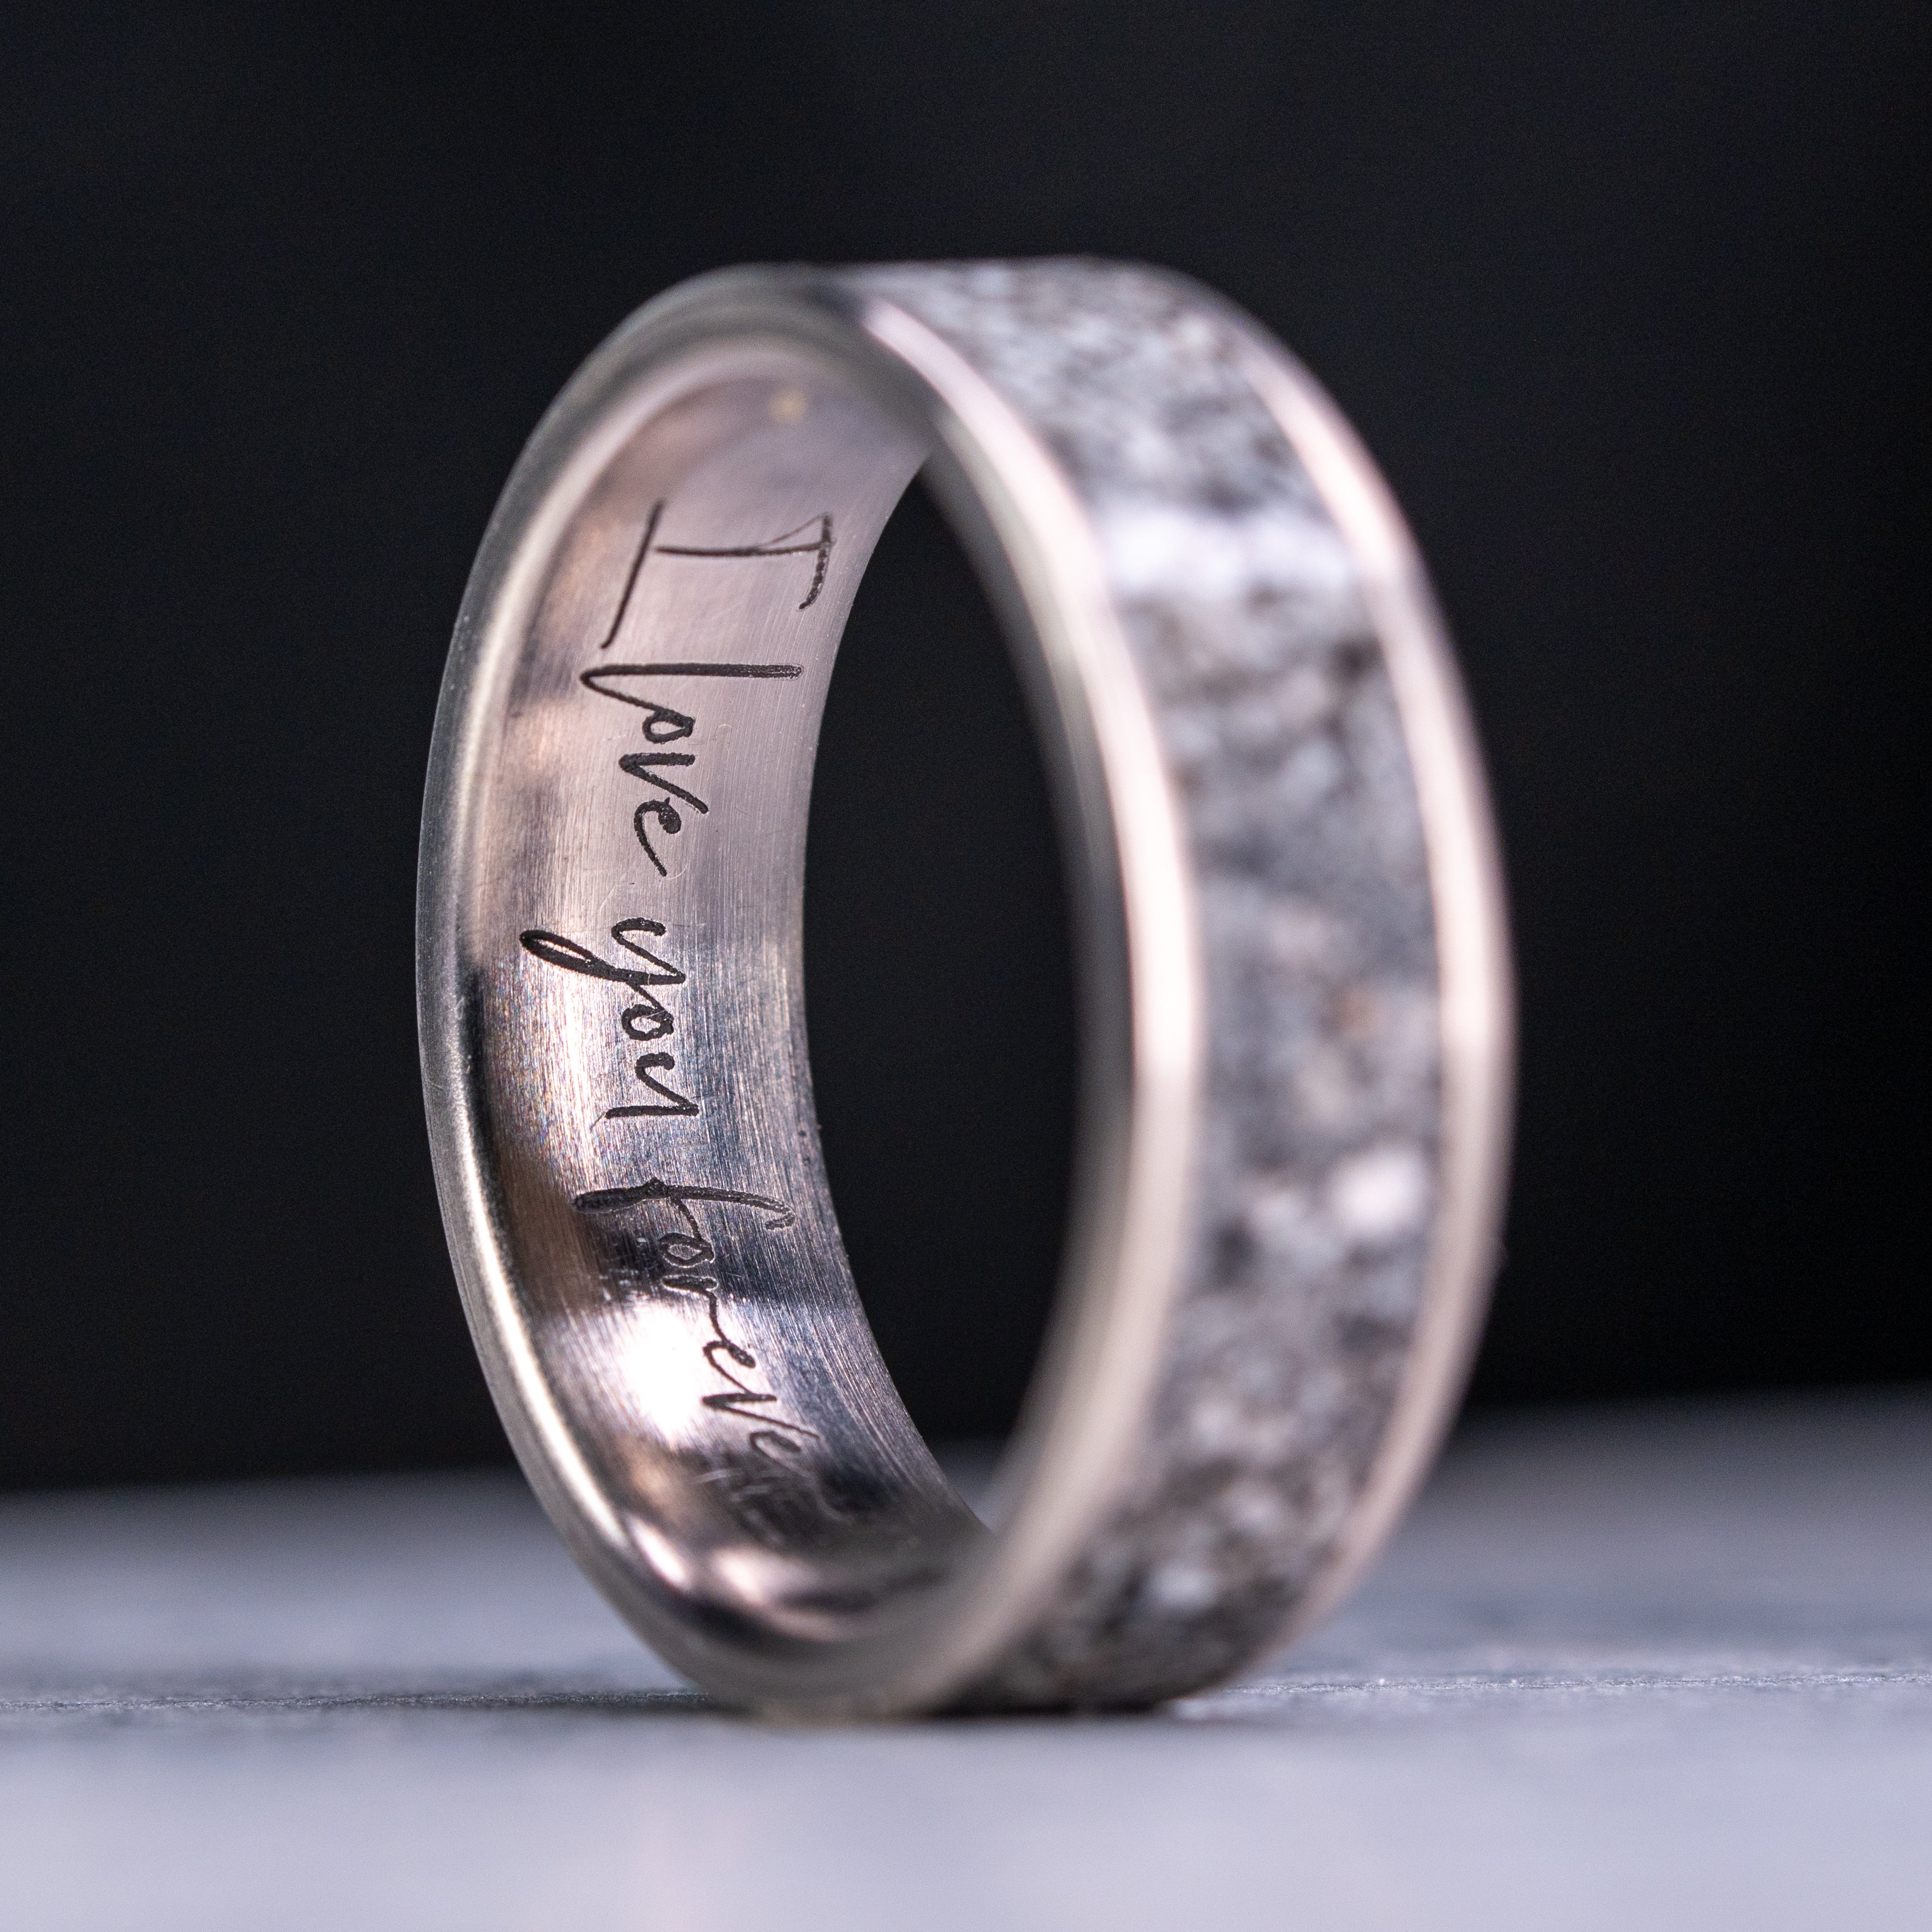 Inside Ring Engraving | Hand Engraved Jewelry | Olivia Ewing